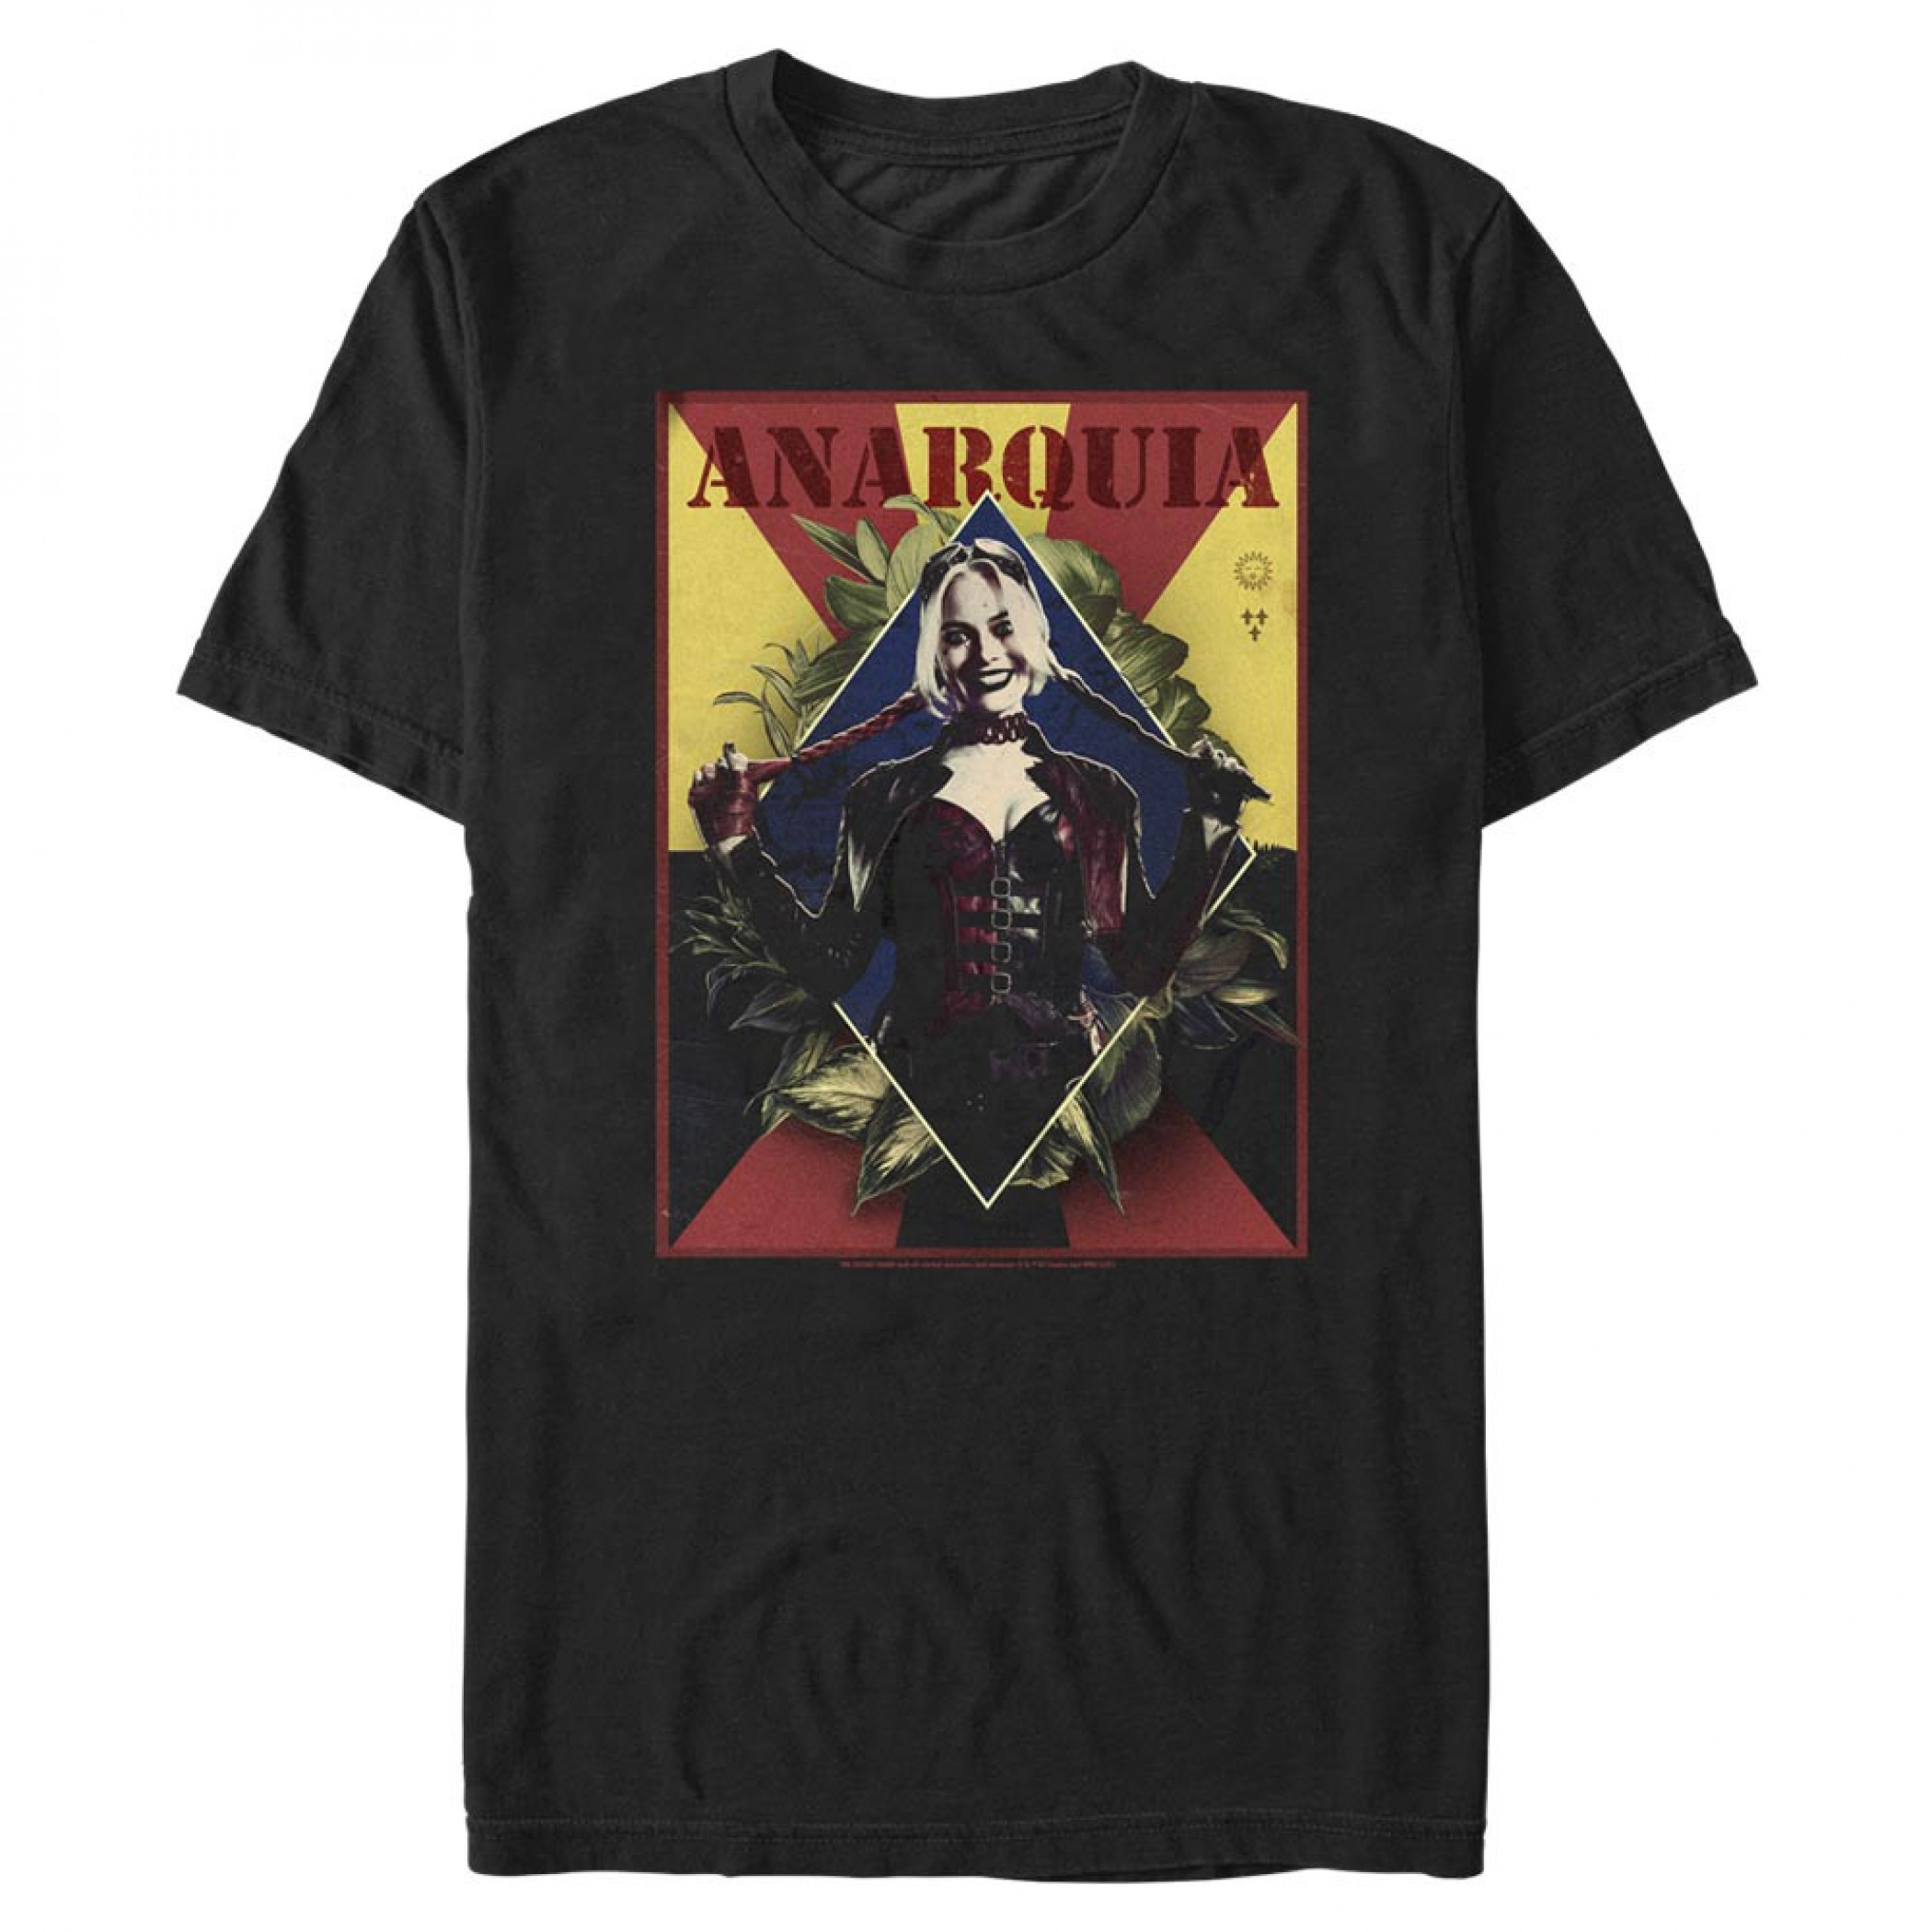 The Suicide Squad Harley Quinn Anarquia Men's T-Shirt